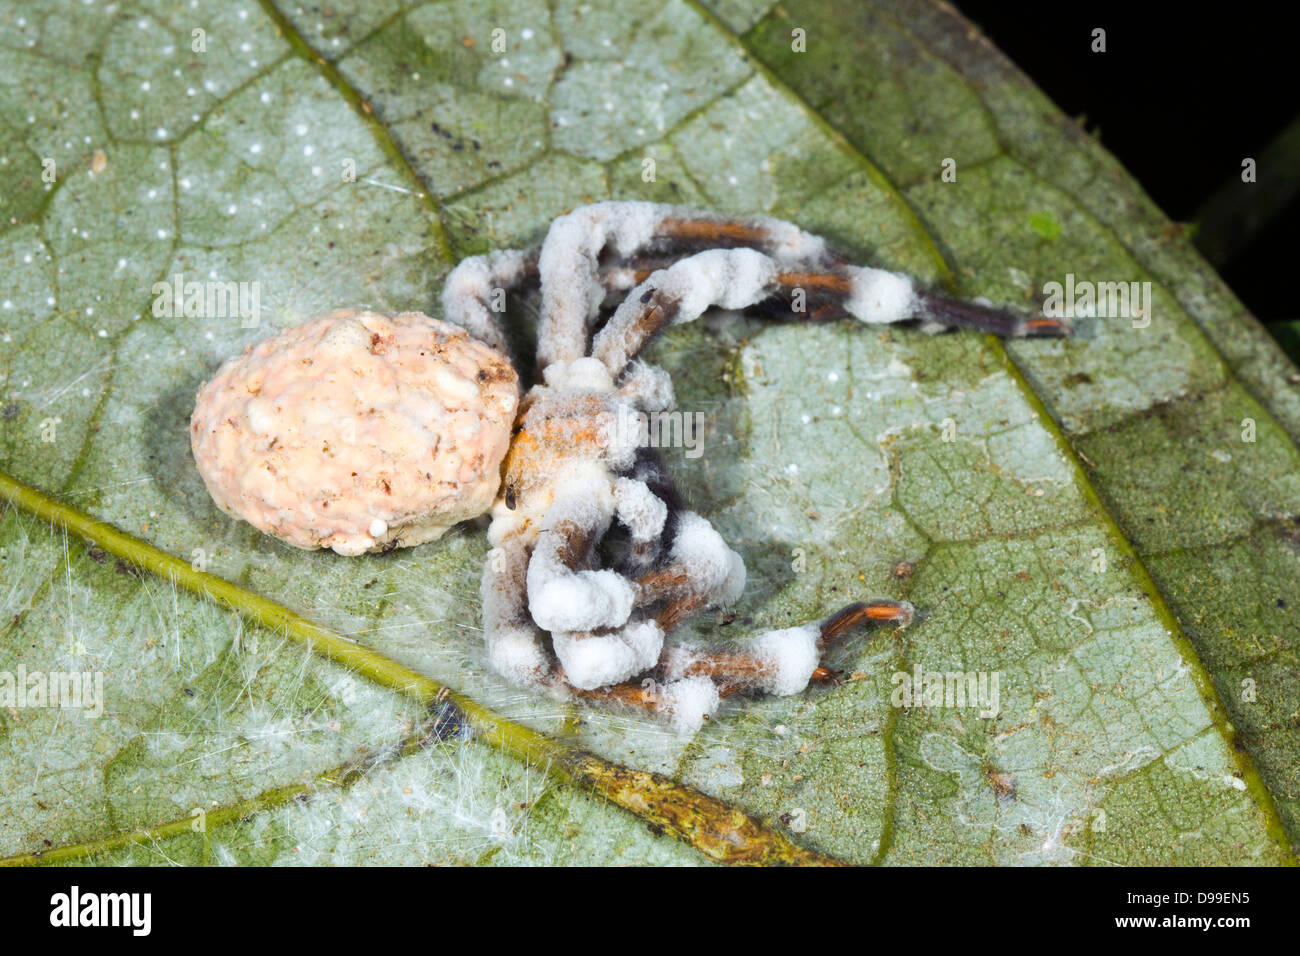 Large spider parasitized and killed by a Cordyceps fungus in the rainforest understory, Ecuador Stock Photo